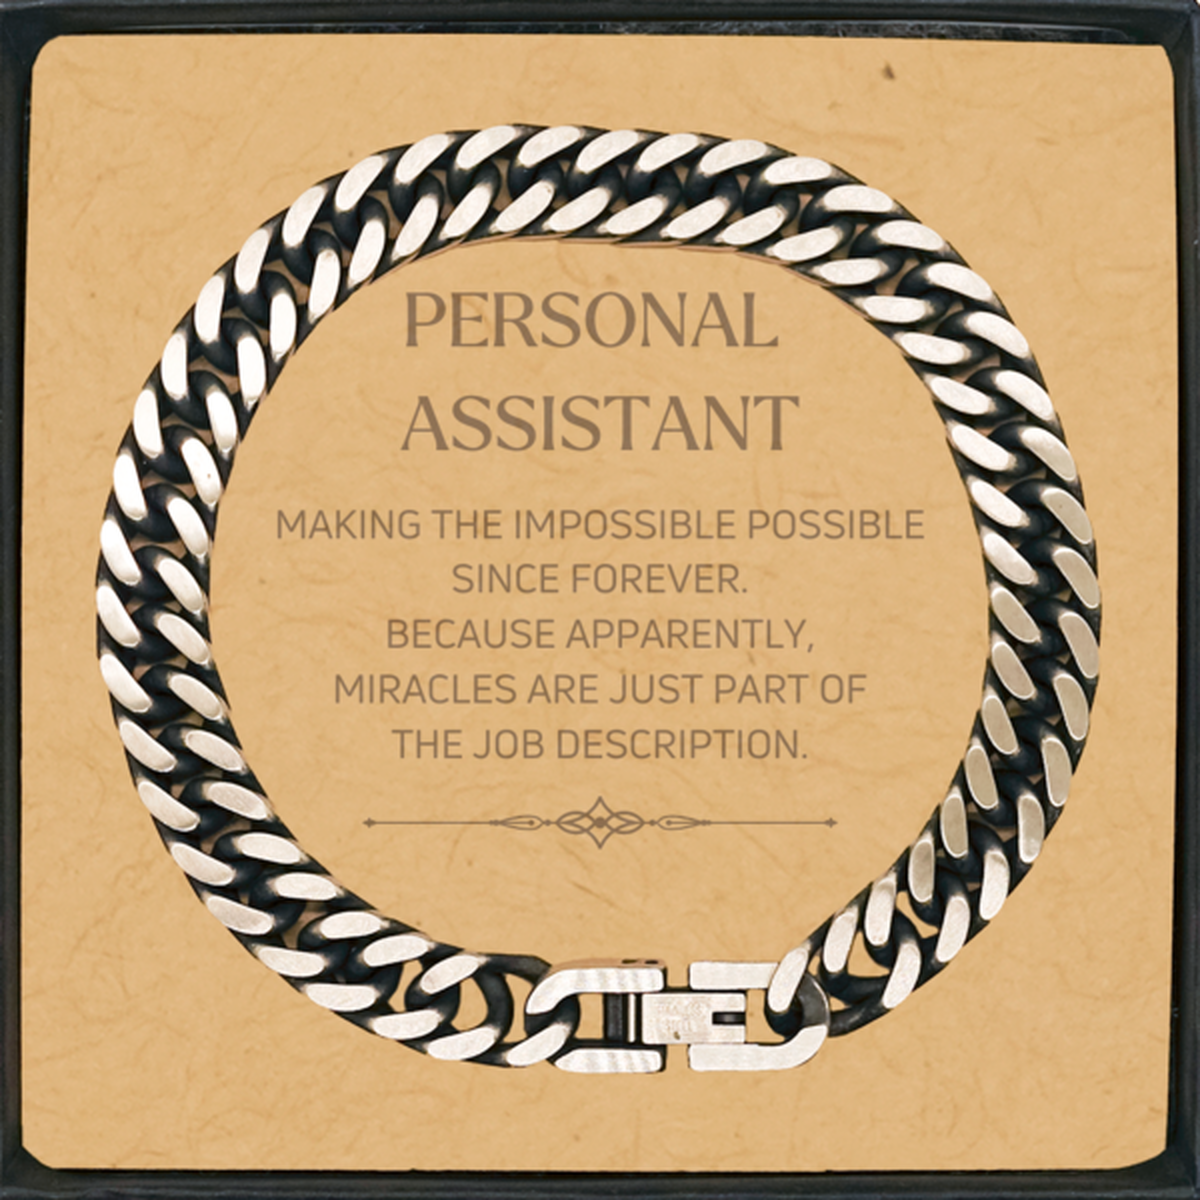 Funny Personal Assistant Gifts, Miracles are just part of the job description, Inspirational Birthday Cuban Link Chain Bracelet For Personal Assistant, Men, Women, Coworkers, Friends, Boss